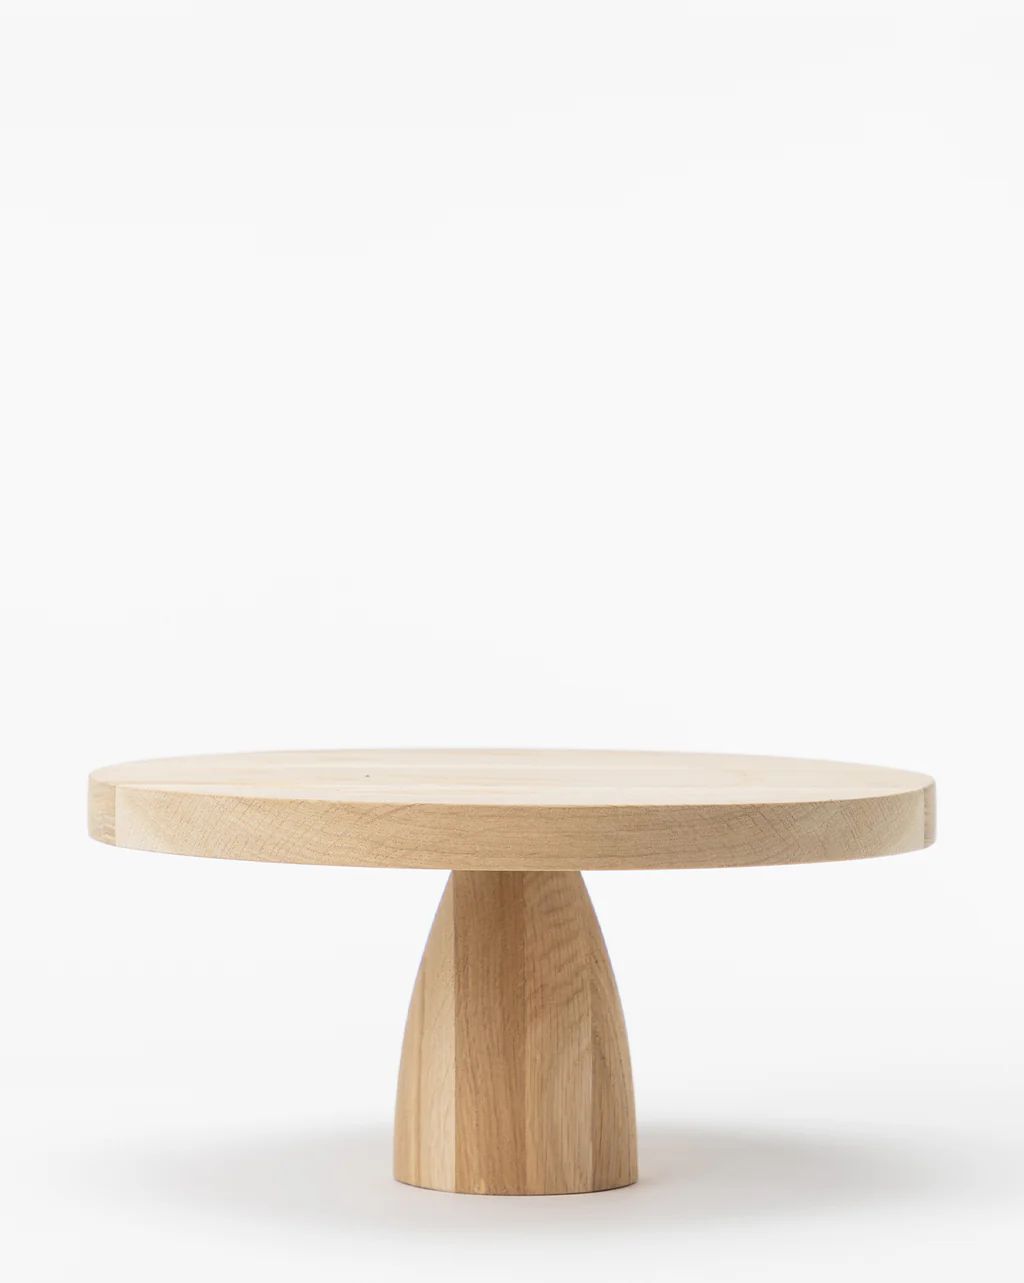 Wooden Cake Stand | McGee & Co.